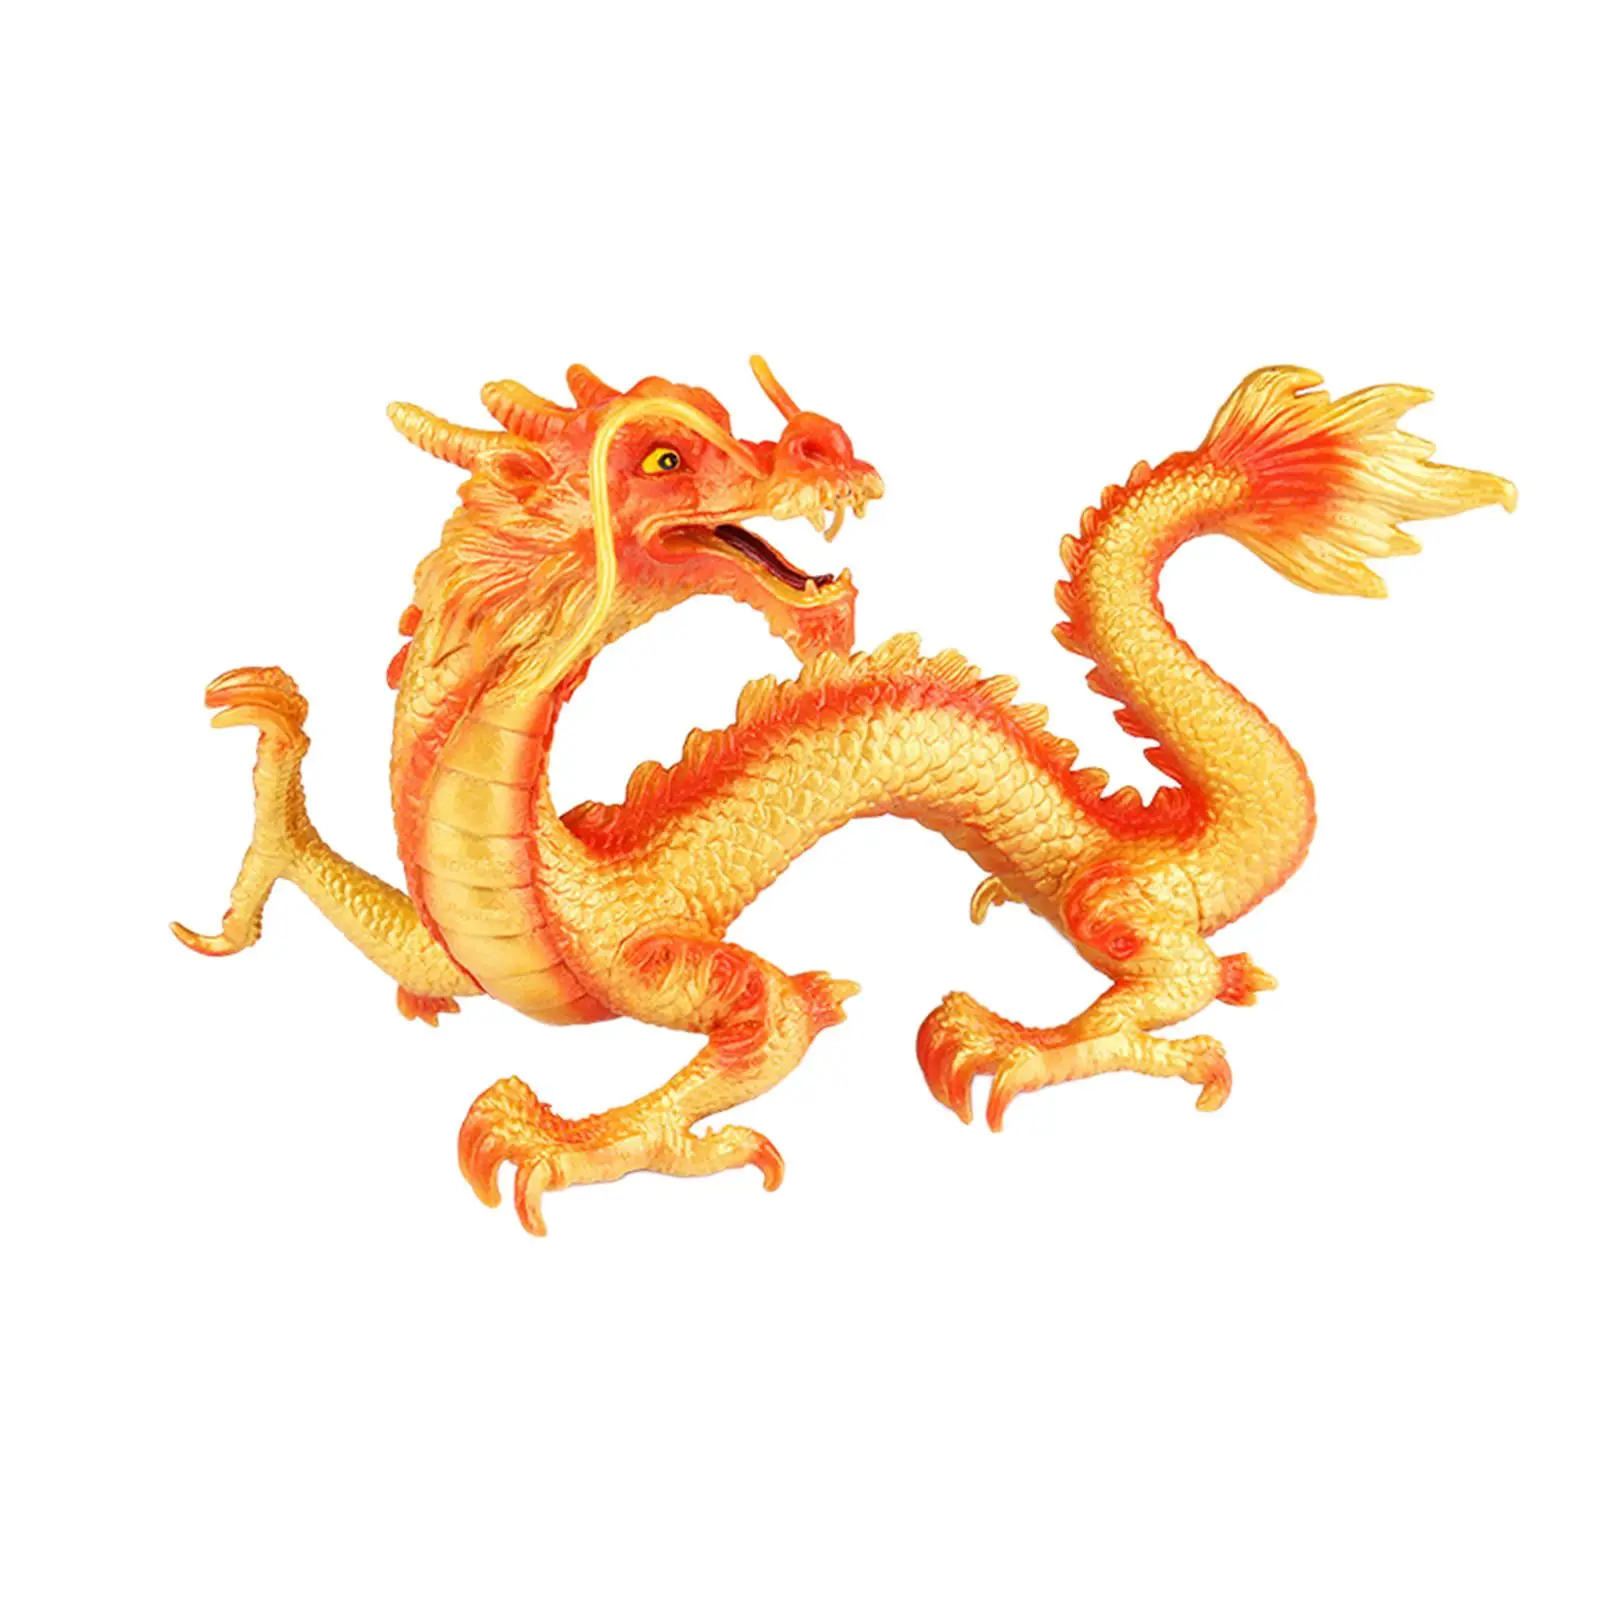 Chinese Dragon Figurine Collection Educational Home Decor Realistic Detailed Action Figures for Age 3+ Girls Boys Gift